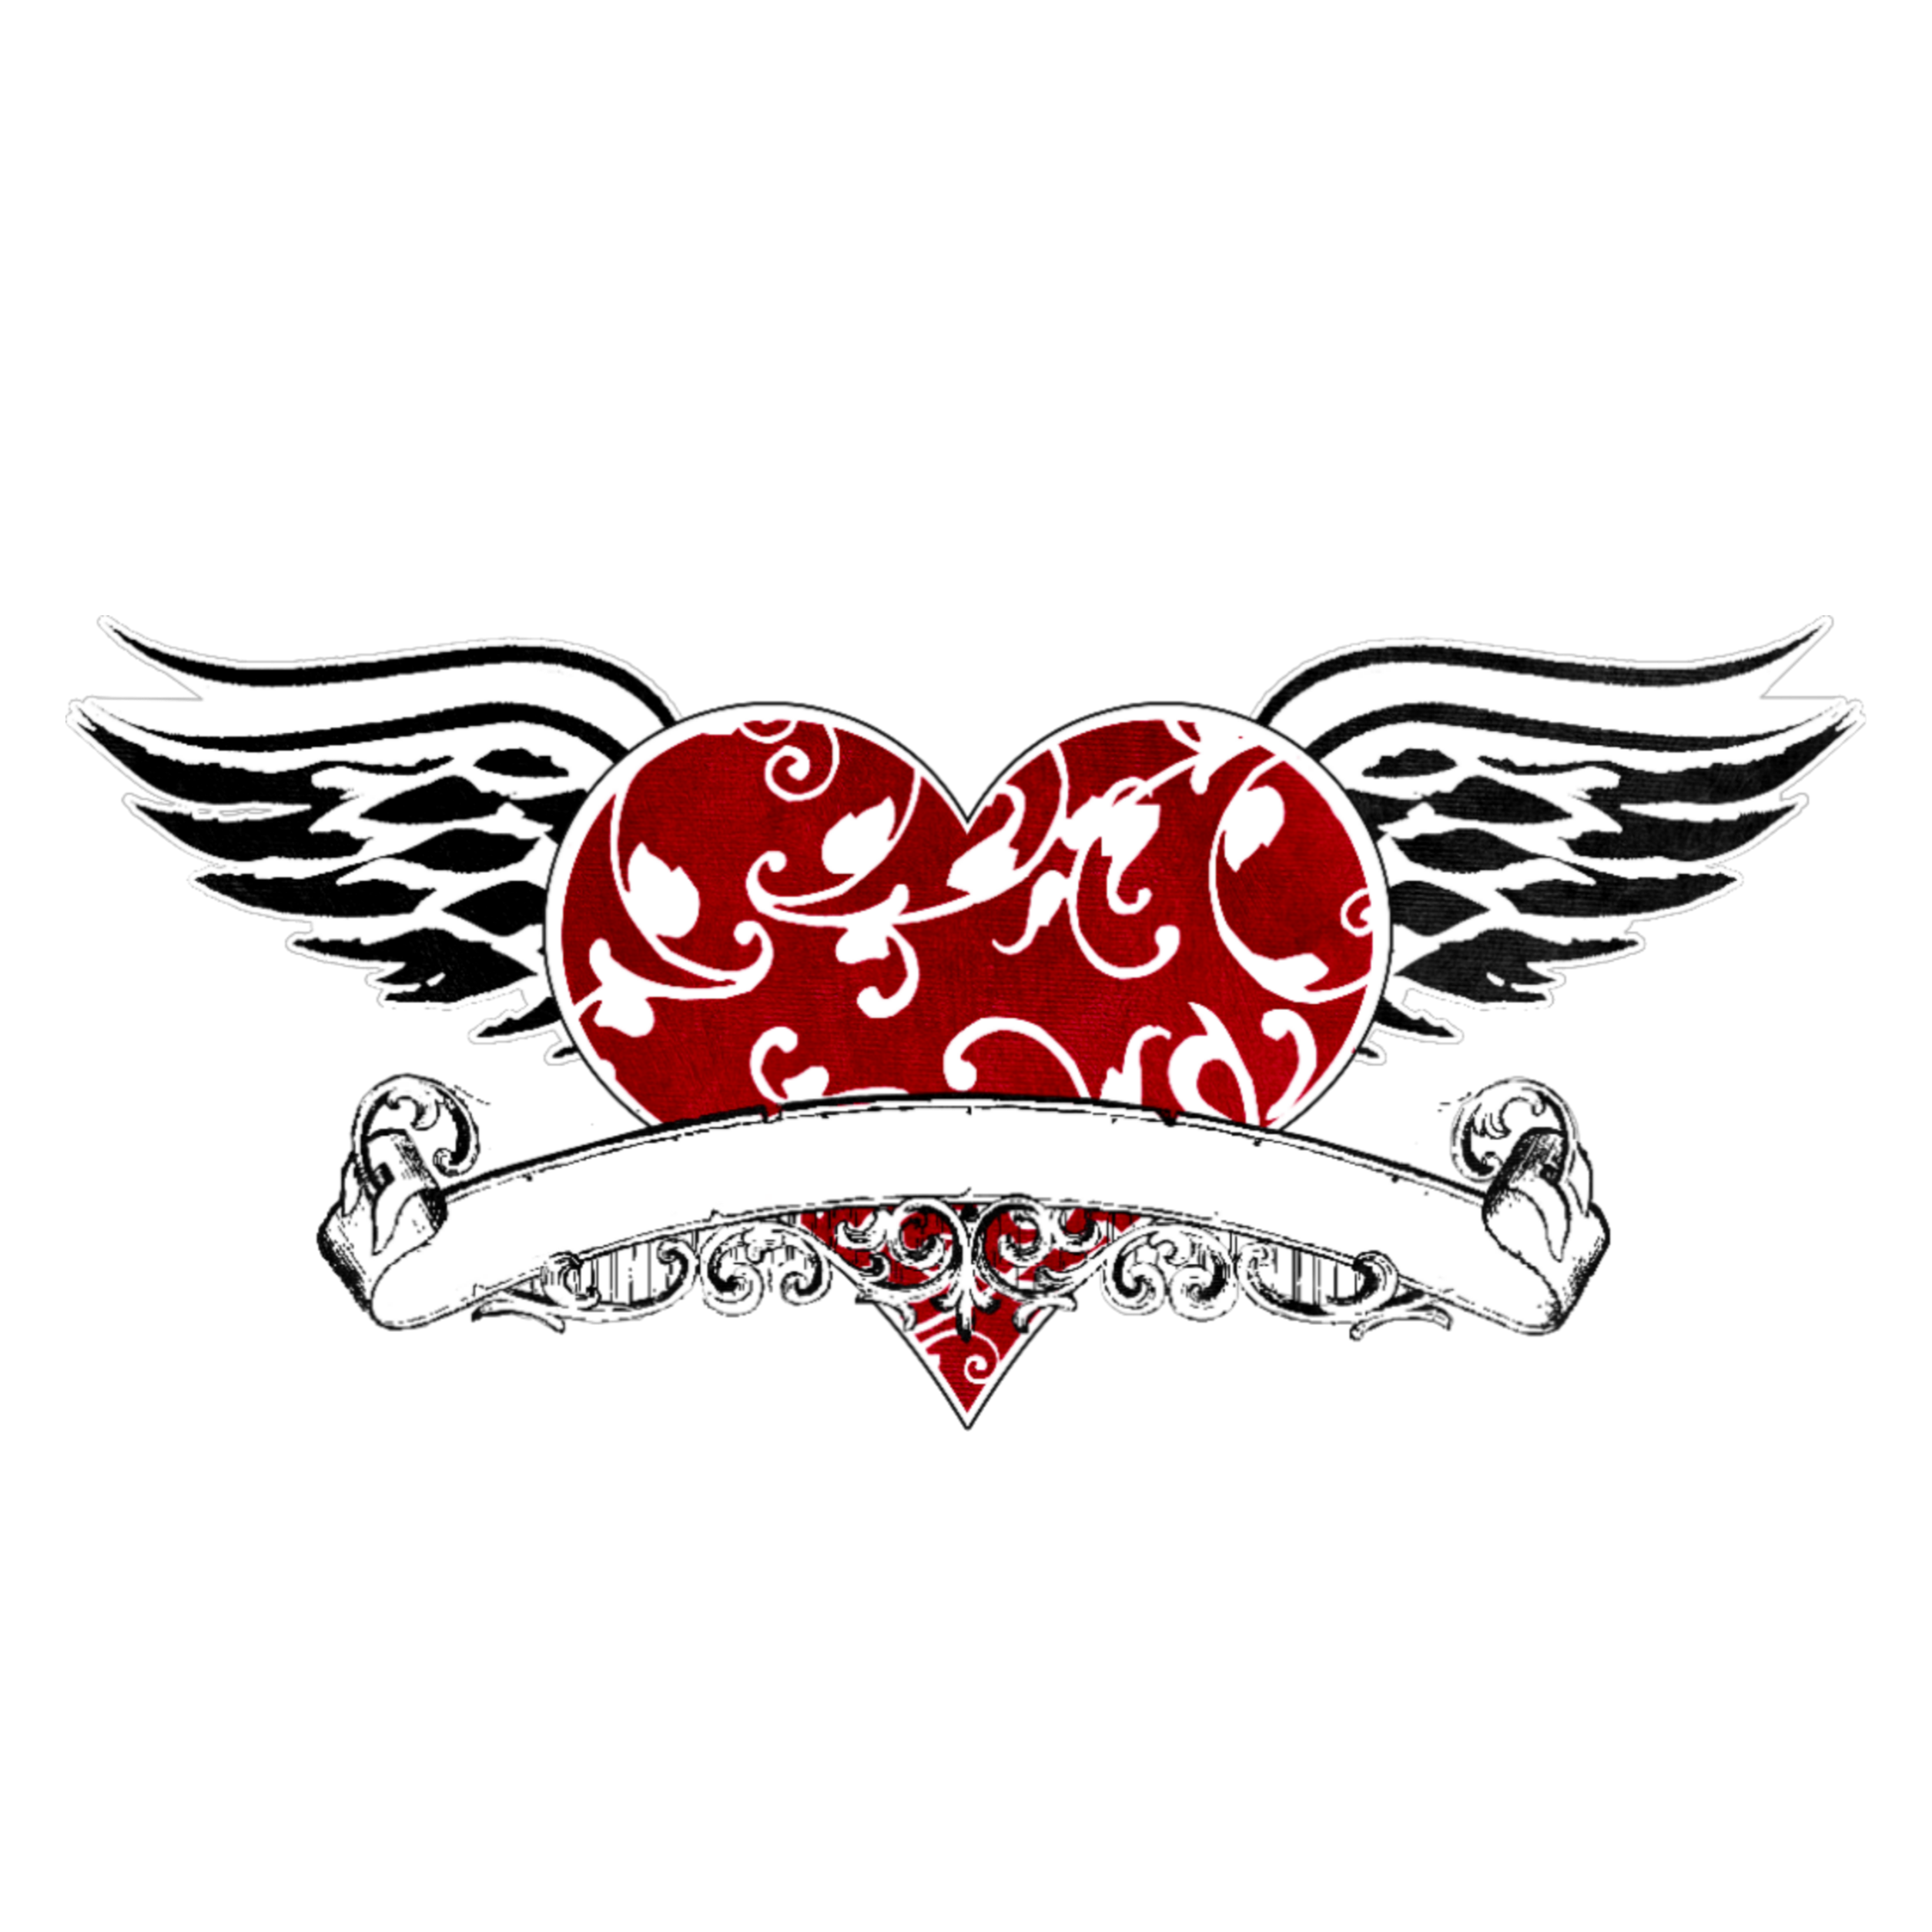 heart love wings red banner black sticker by @agdemoss80